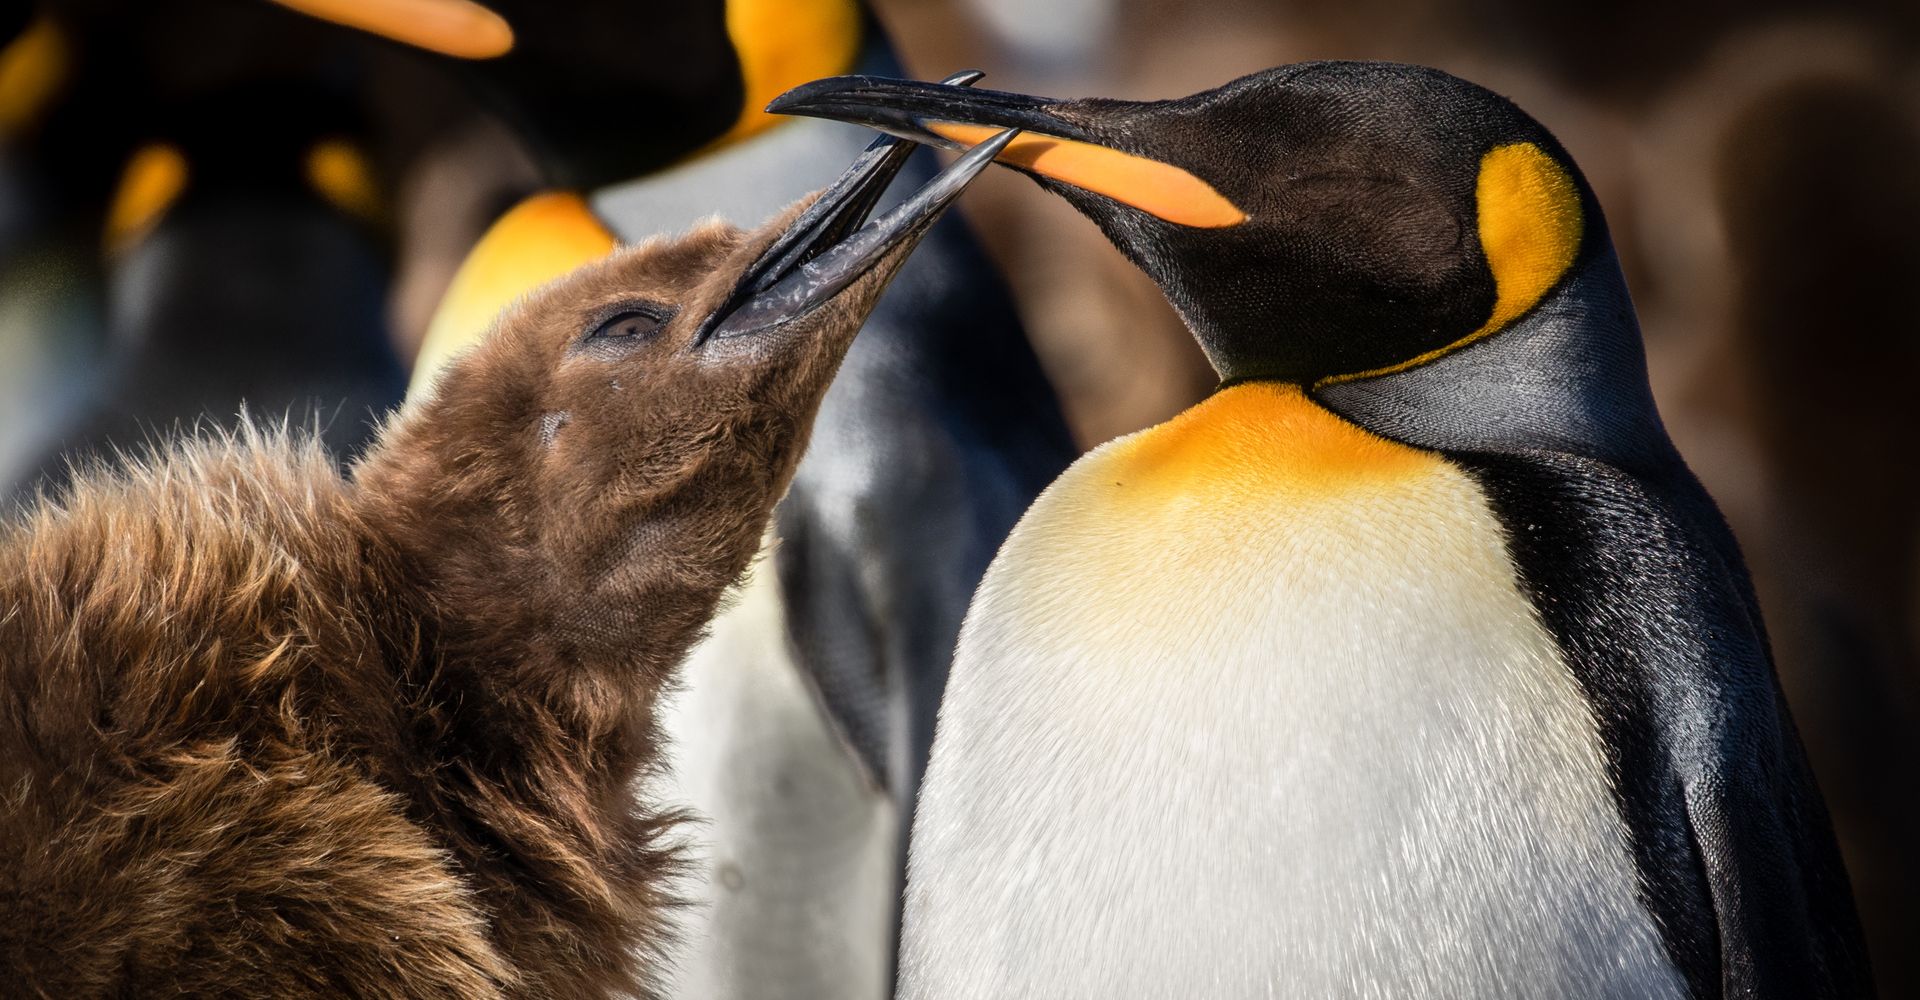 King Penguin and chick in South Georgia